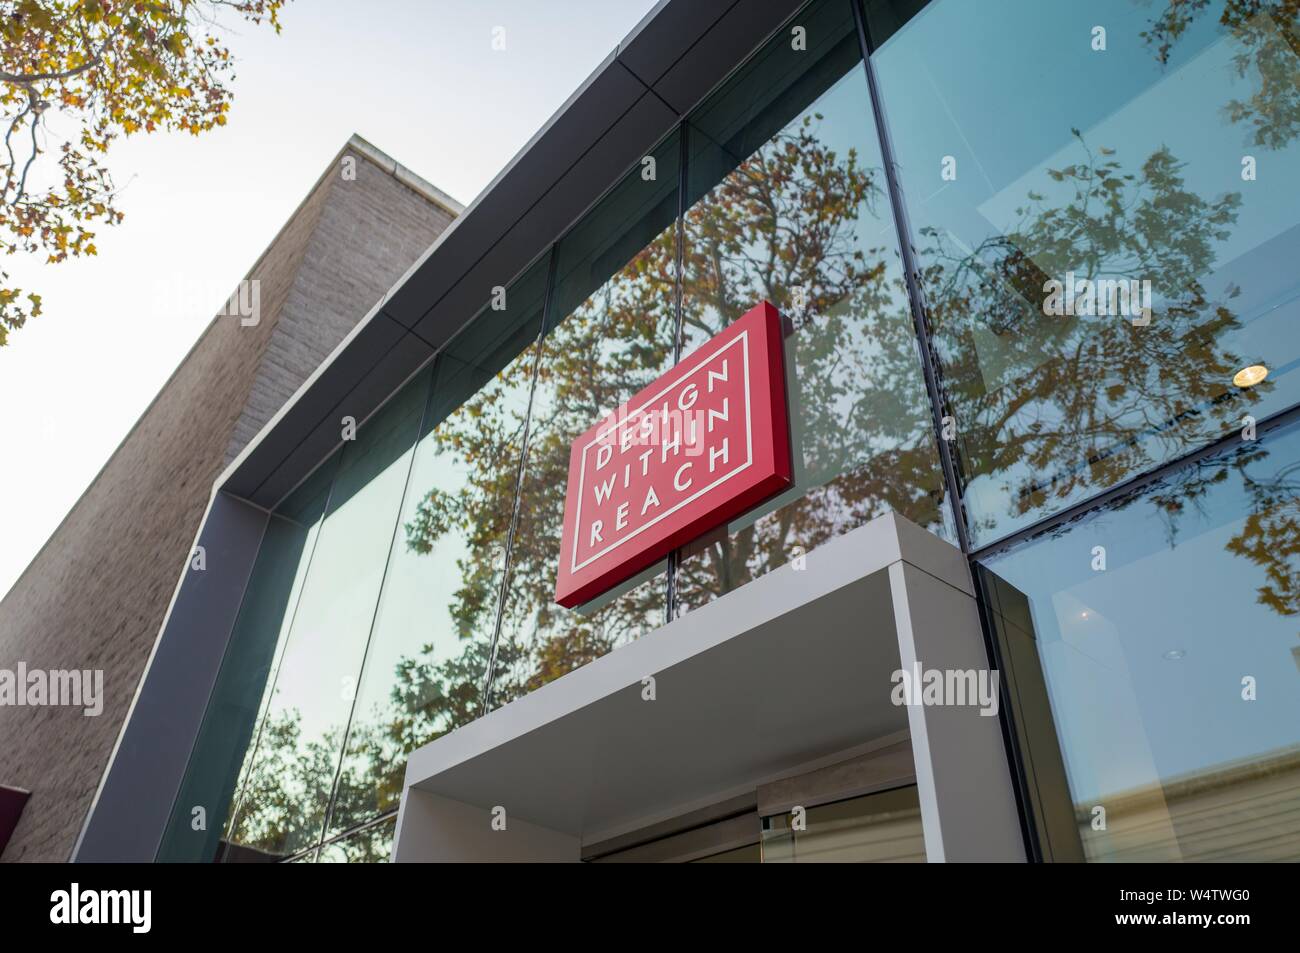 Facade with sign at Design Within Reach, a luxury furniture store providing Herman Miller and other high end office furniture to companies in the Silicon Valley town of Palo Alto, California, November 17, 2018. () Stock Photo